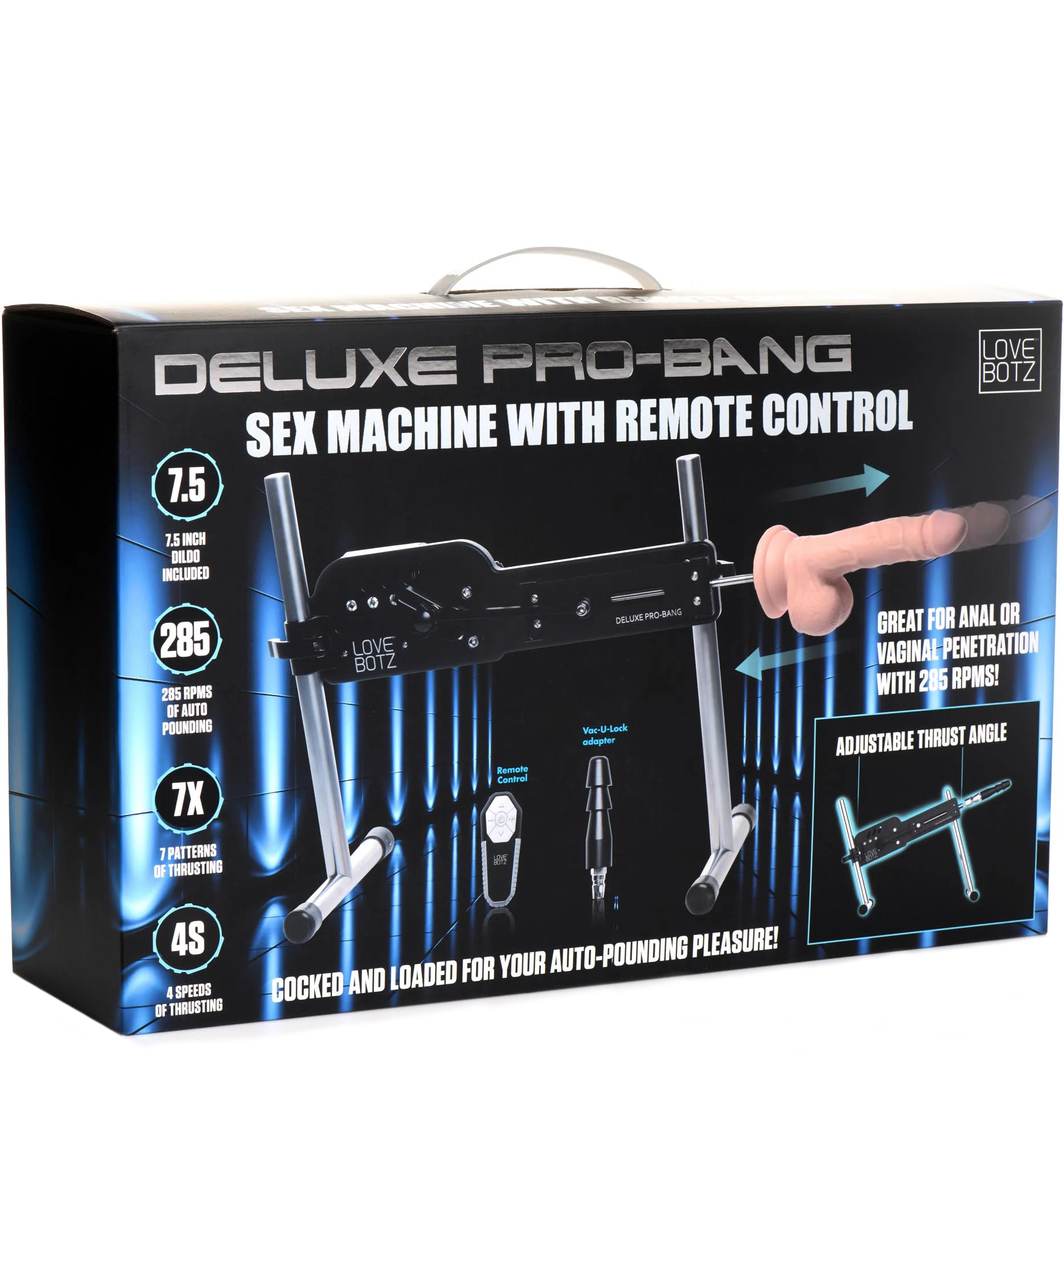 Lovebotz Deluxe Pro-Bang Sex Machine With Remote Control